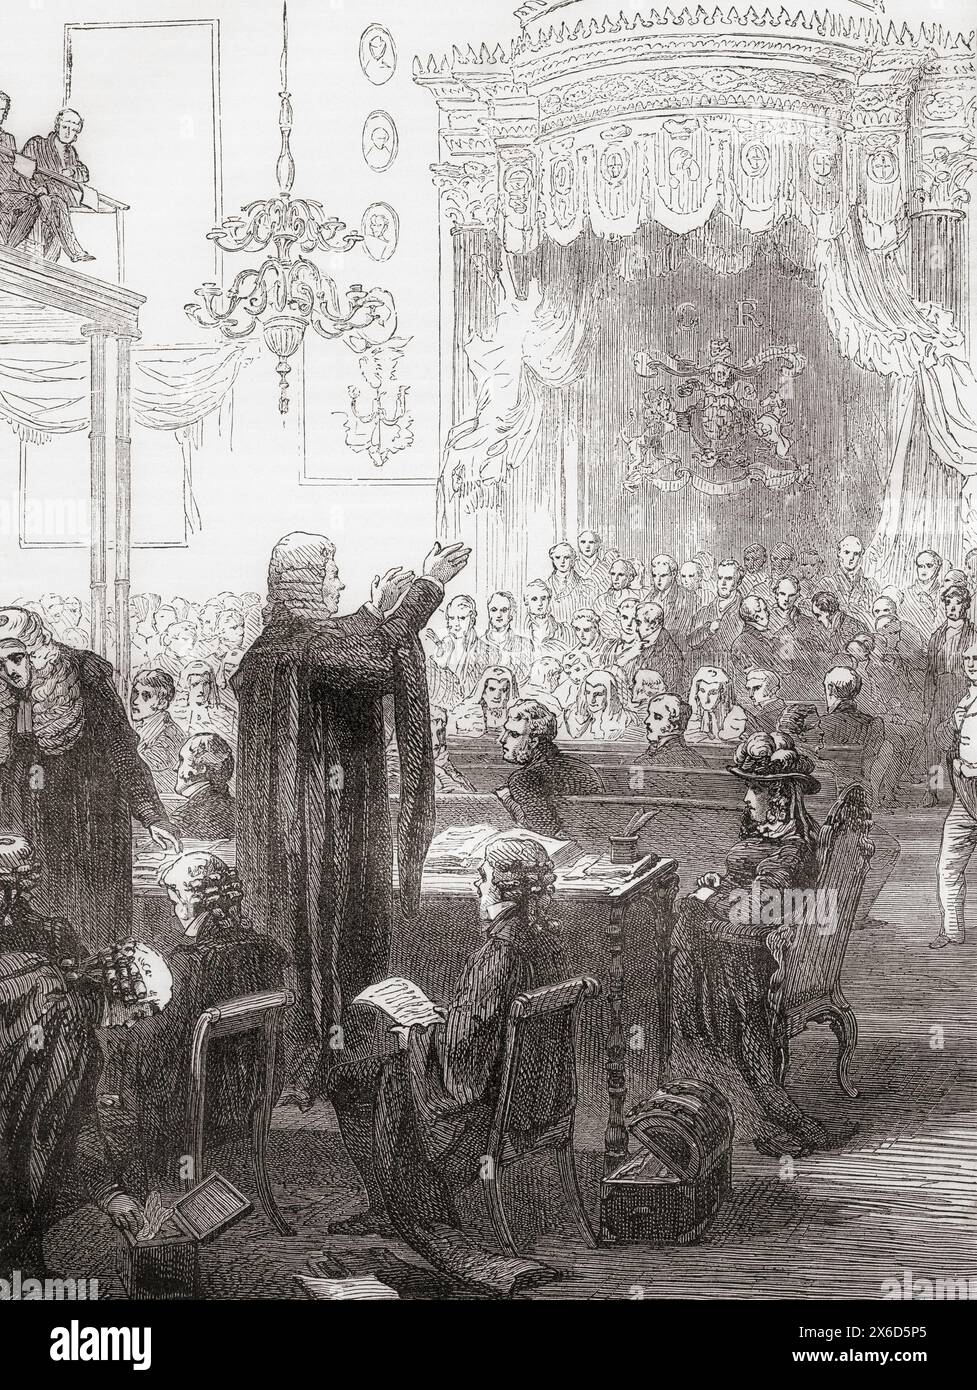 The trial of Queen Caroline, Mr Brougham's speech for the defence, 1820.  Caroline of Brunswick-Wolfenbüttel, 1768 –1821. Queen of the United Kingdom of Great Britain and Ireland and Queen of Hanover, 1820 -1821. Estranged wife of King George IV.  From Cassell's Illustrated History of England. Stock Photo